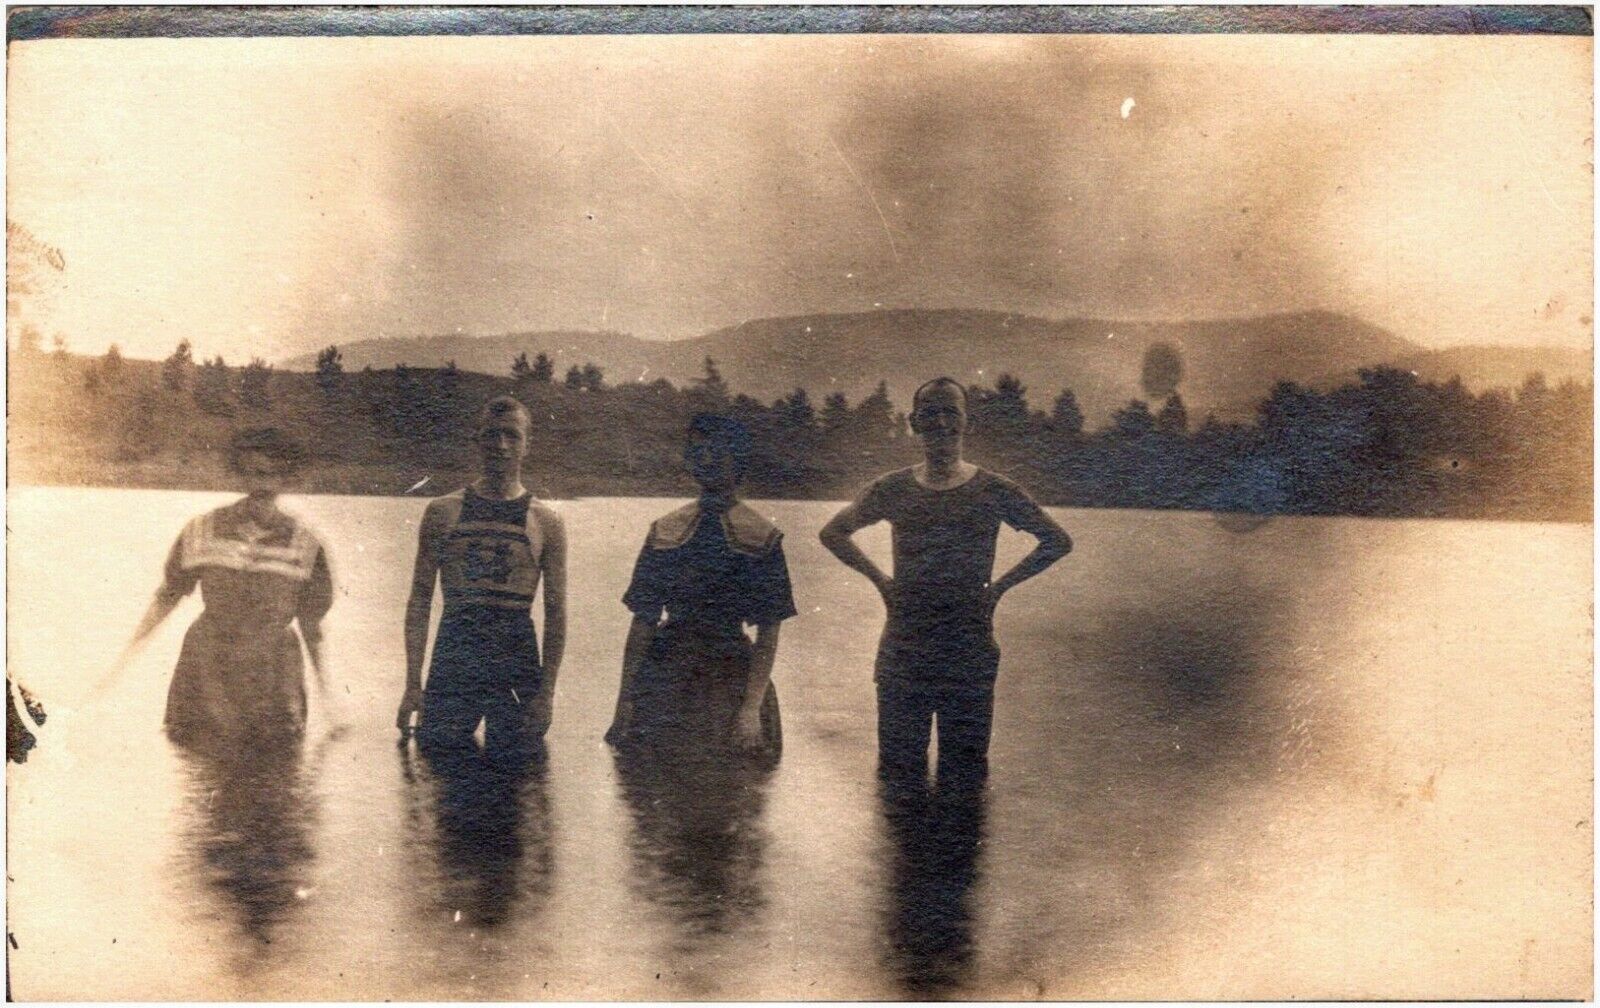 Swimmers Wading in Unidentified Lake Bathing Beauties 1900s RPPC Postcard Photo